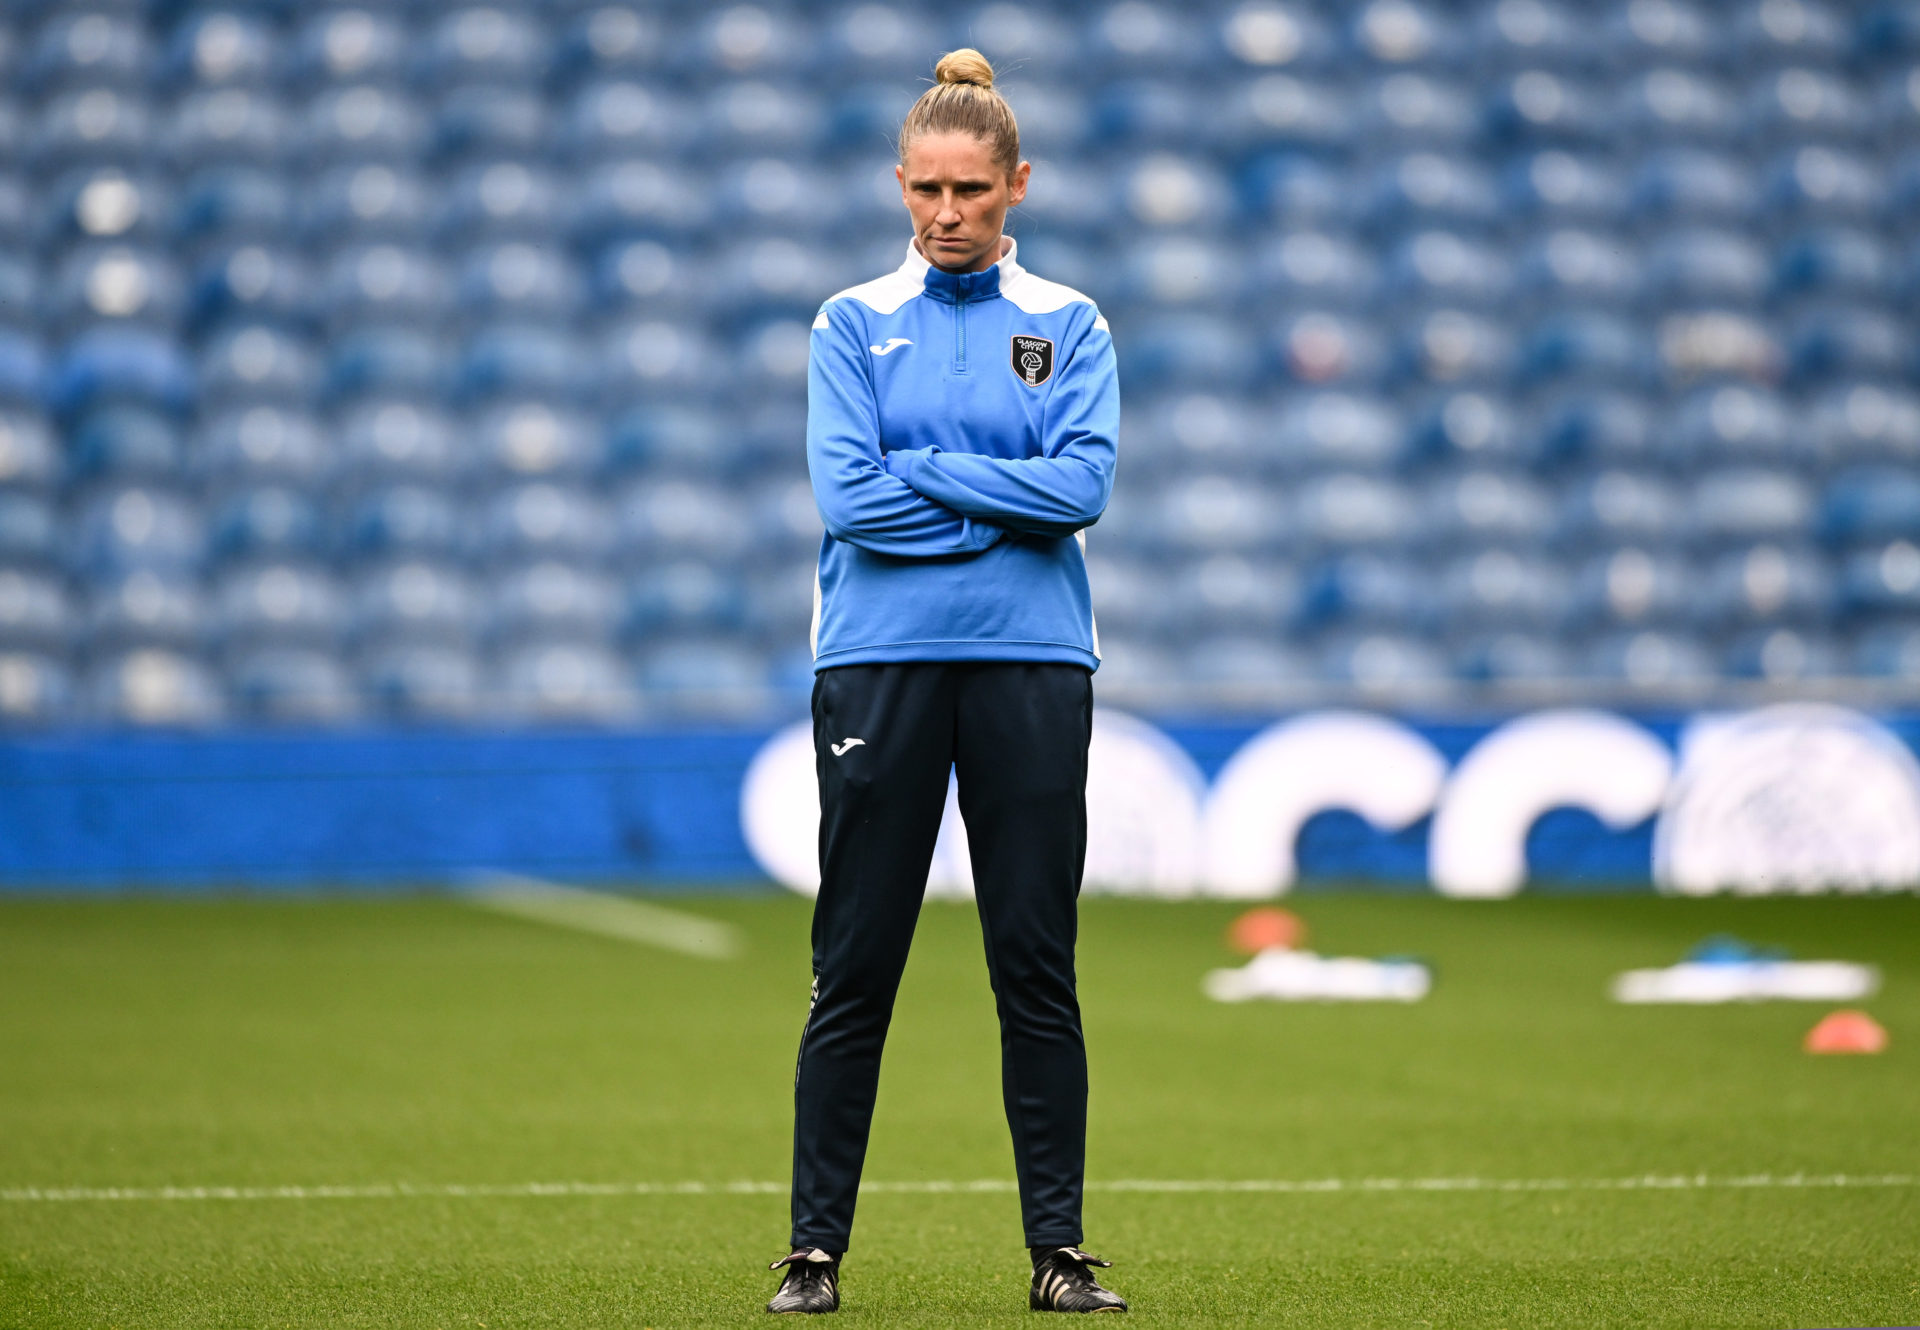 Glasgow City manager Leanne Ross confident ahead of Champions League tie